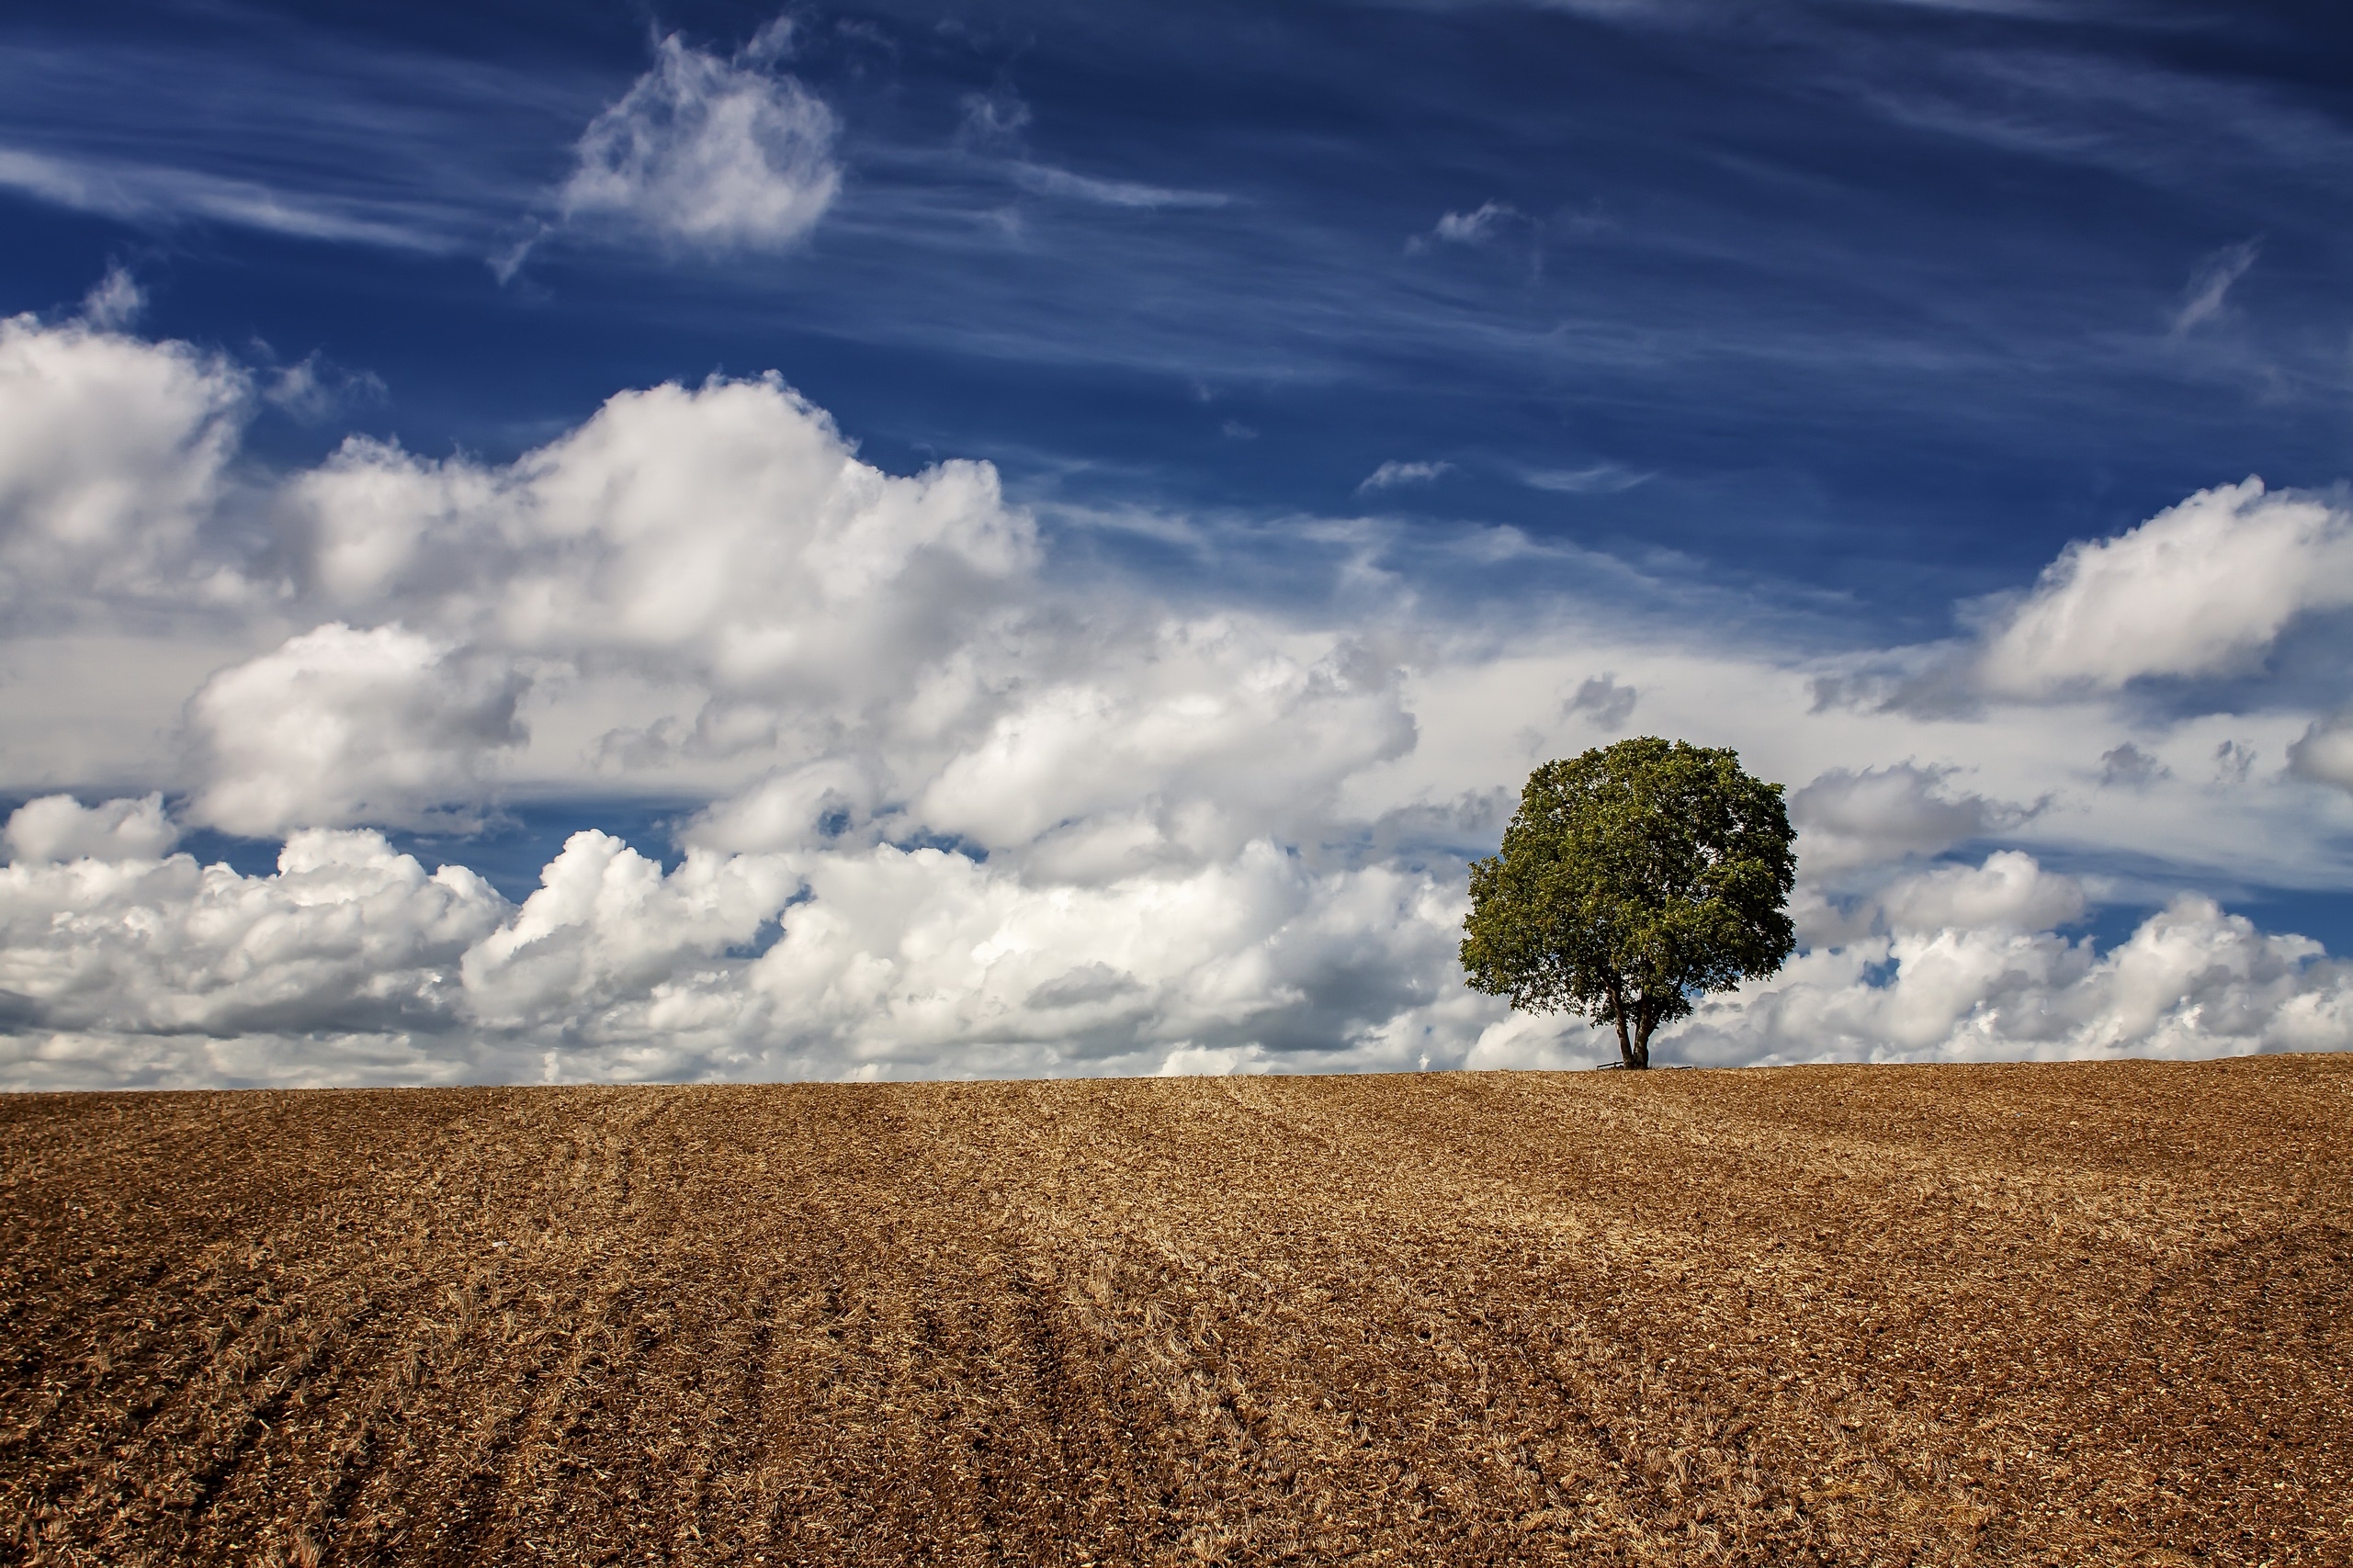 A lonely tree in a field and puffy clouds in the sky